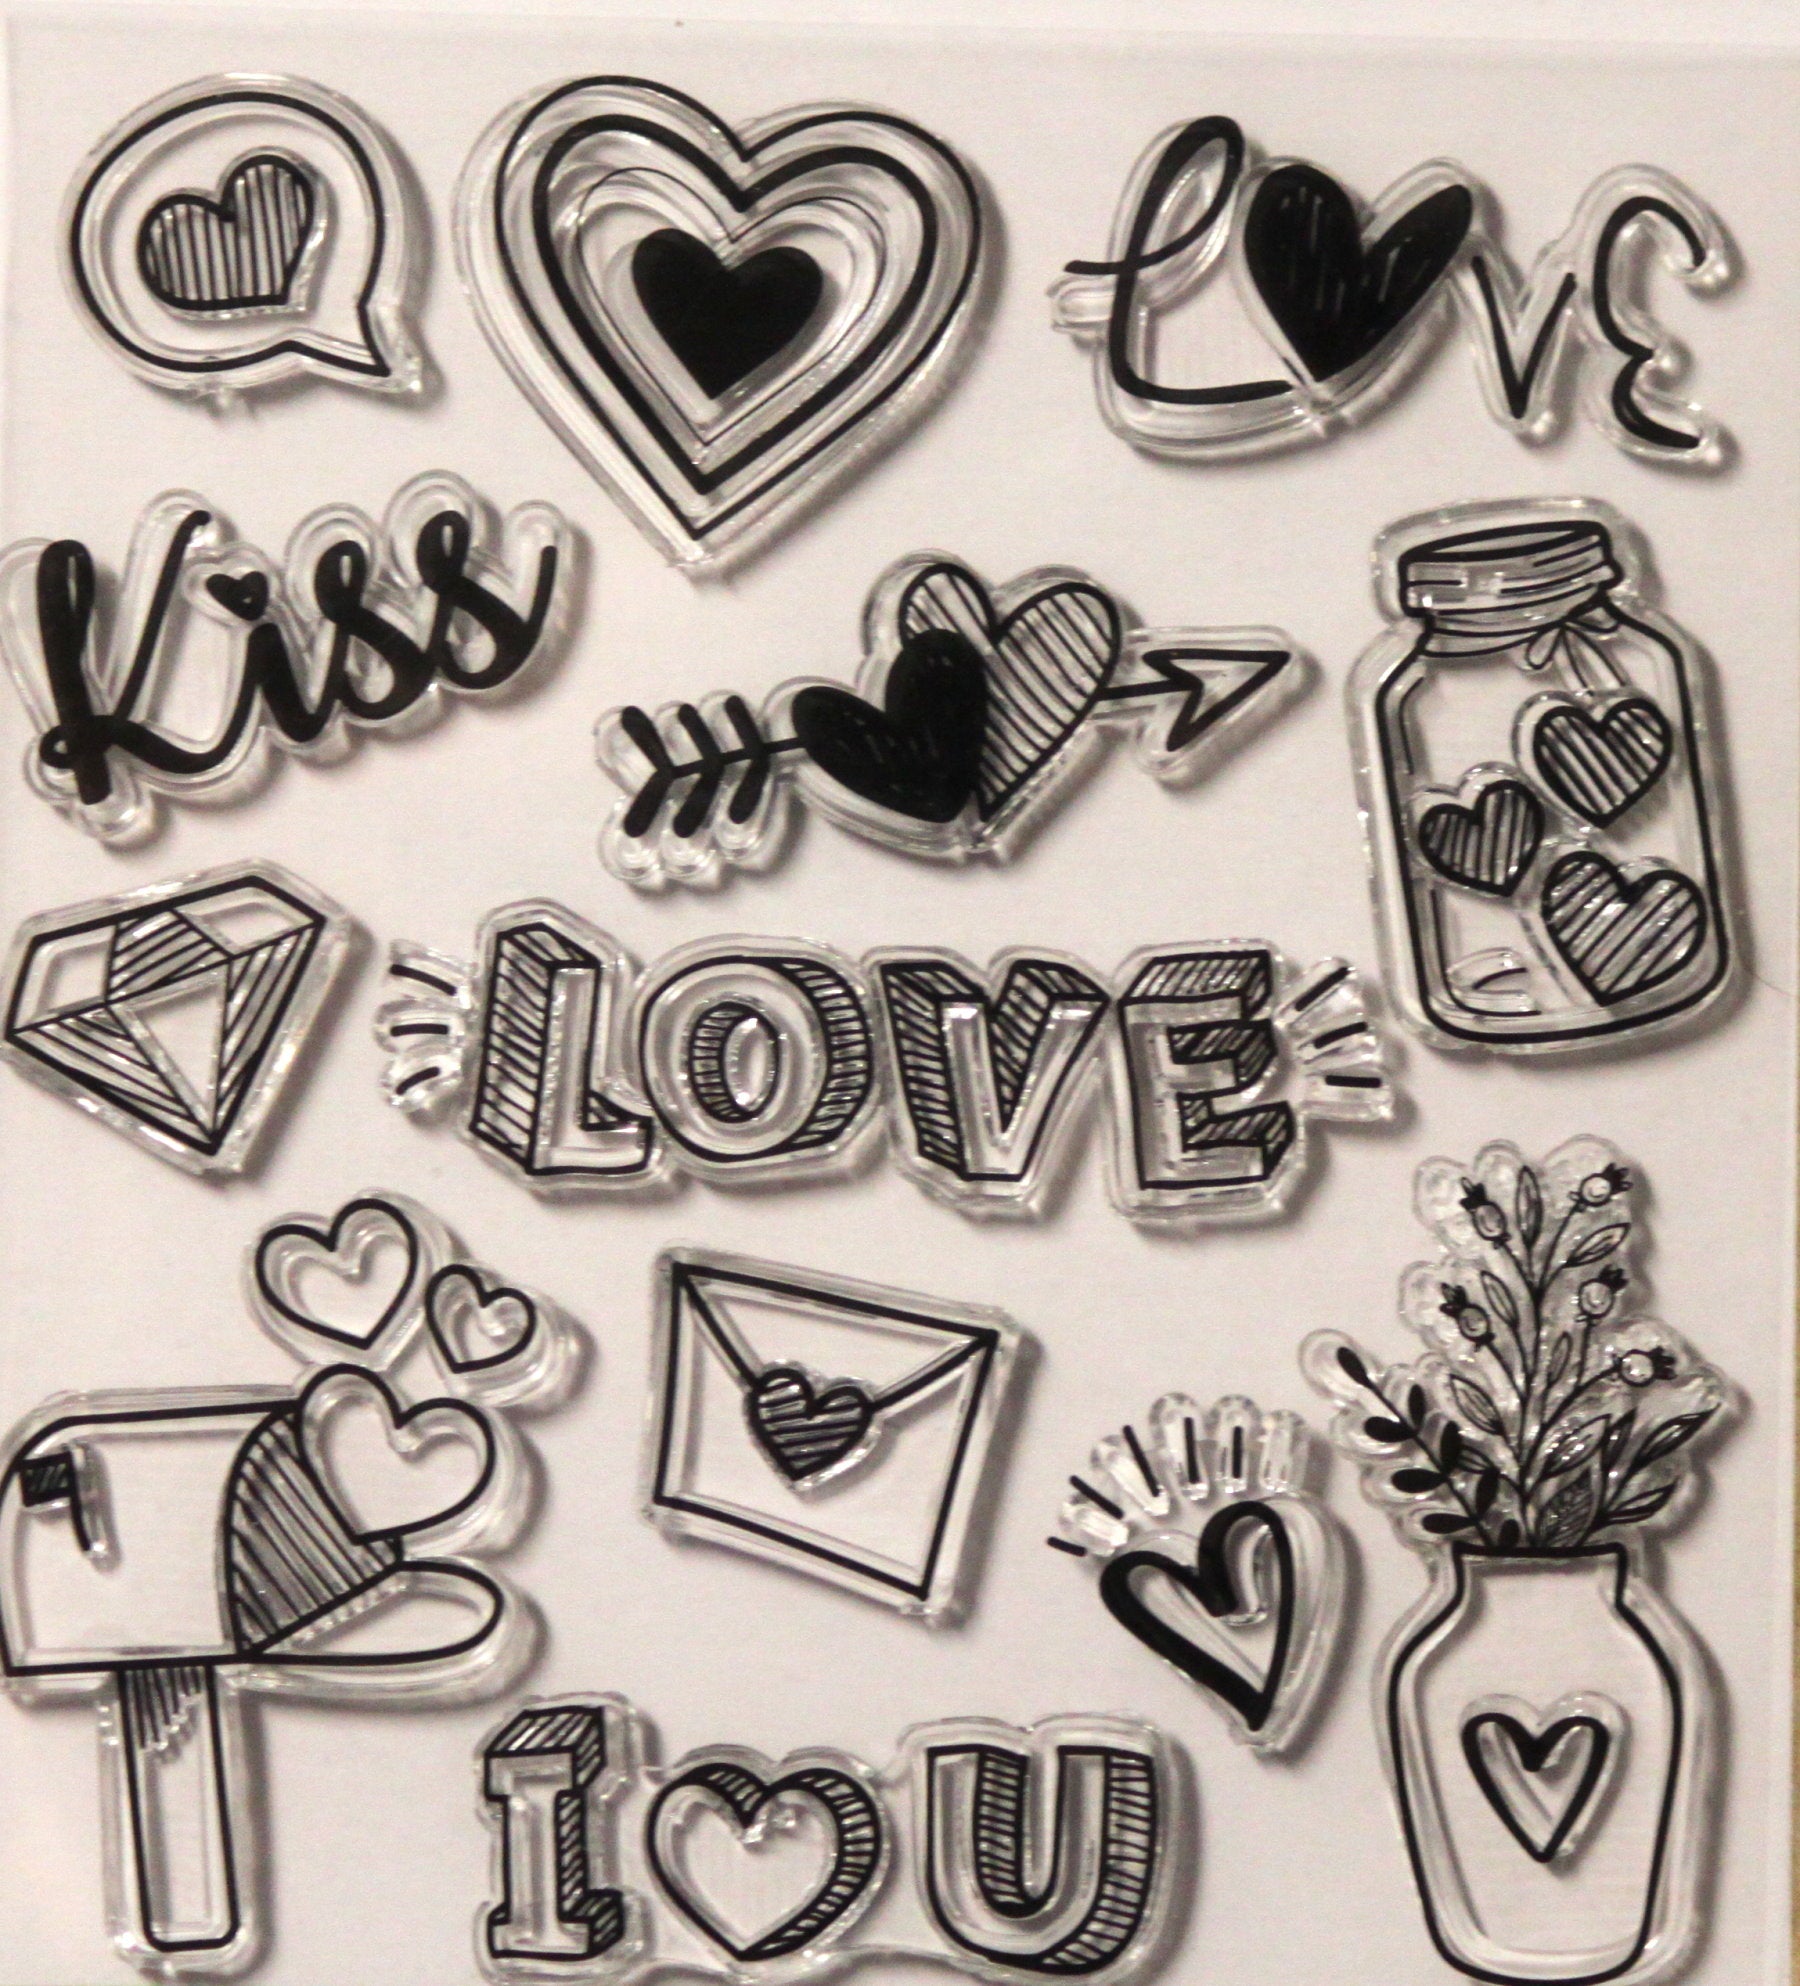 Premium Love Elements Clear Cling Stamps